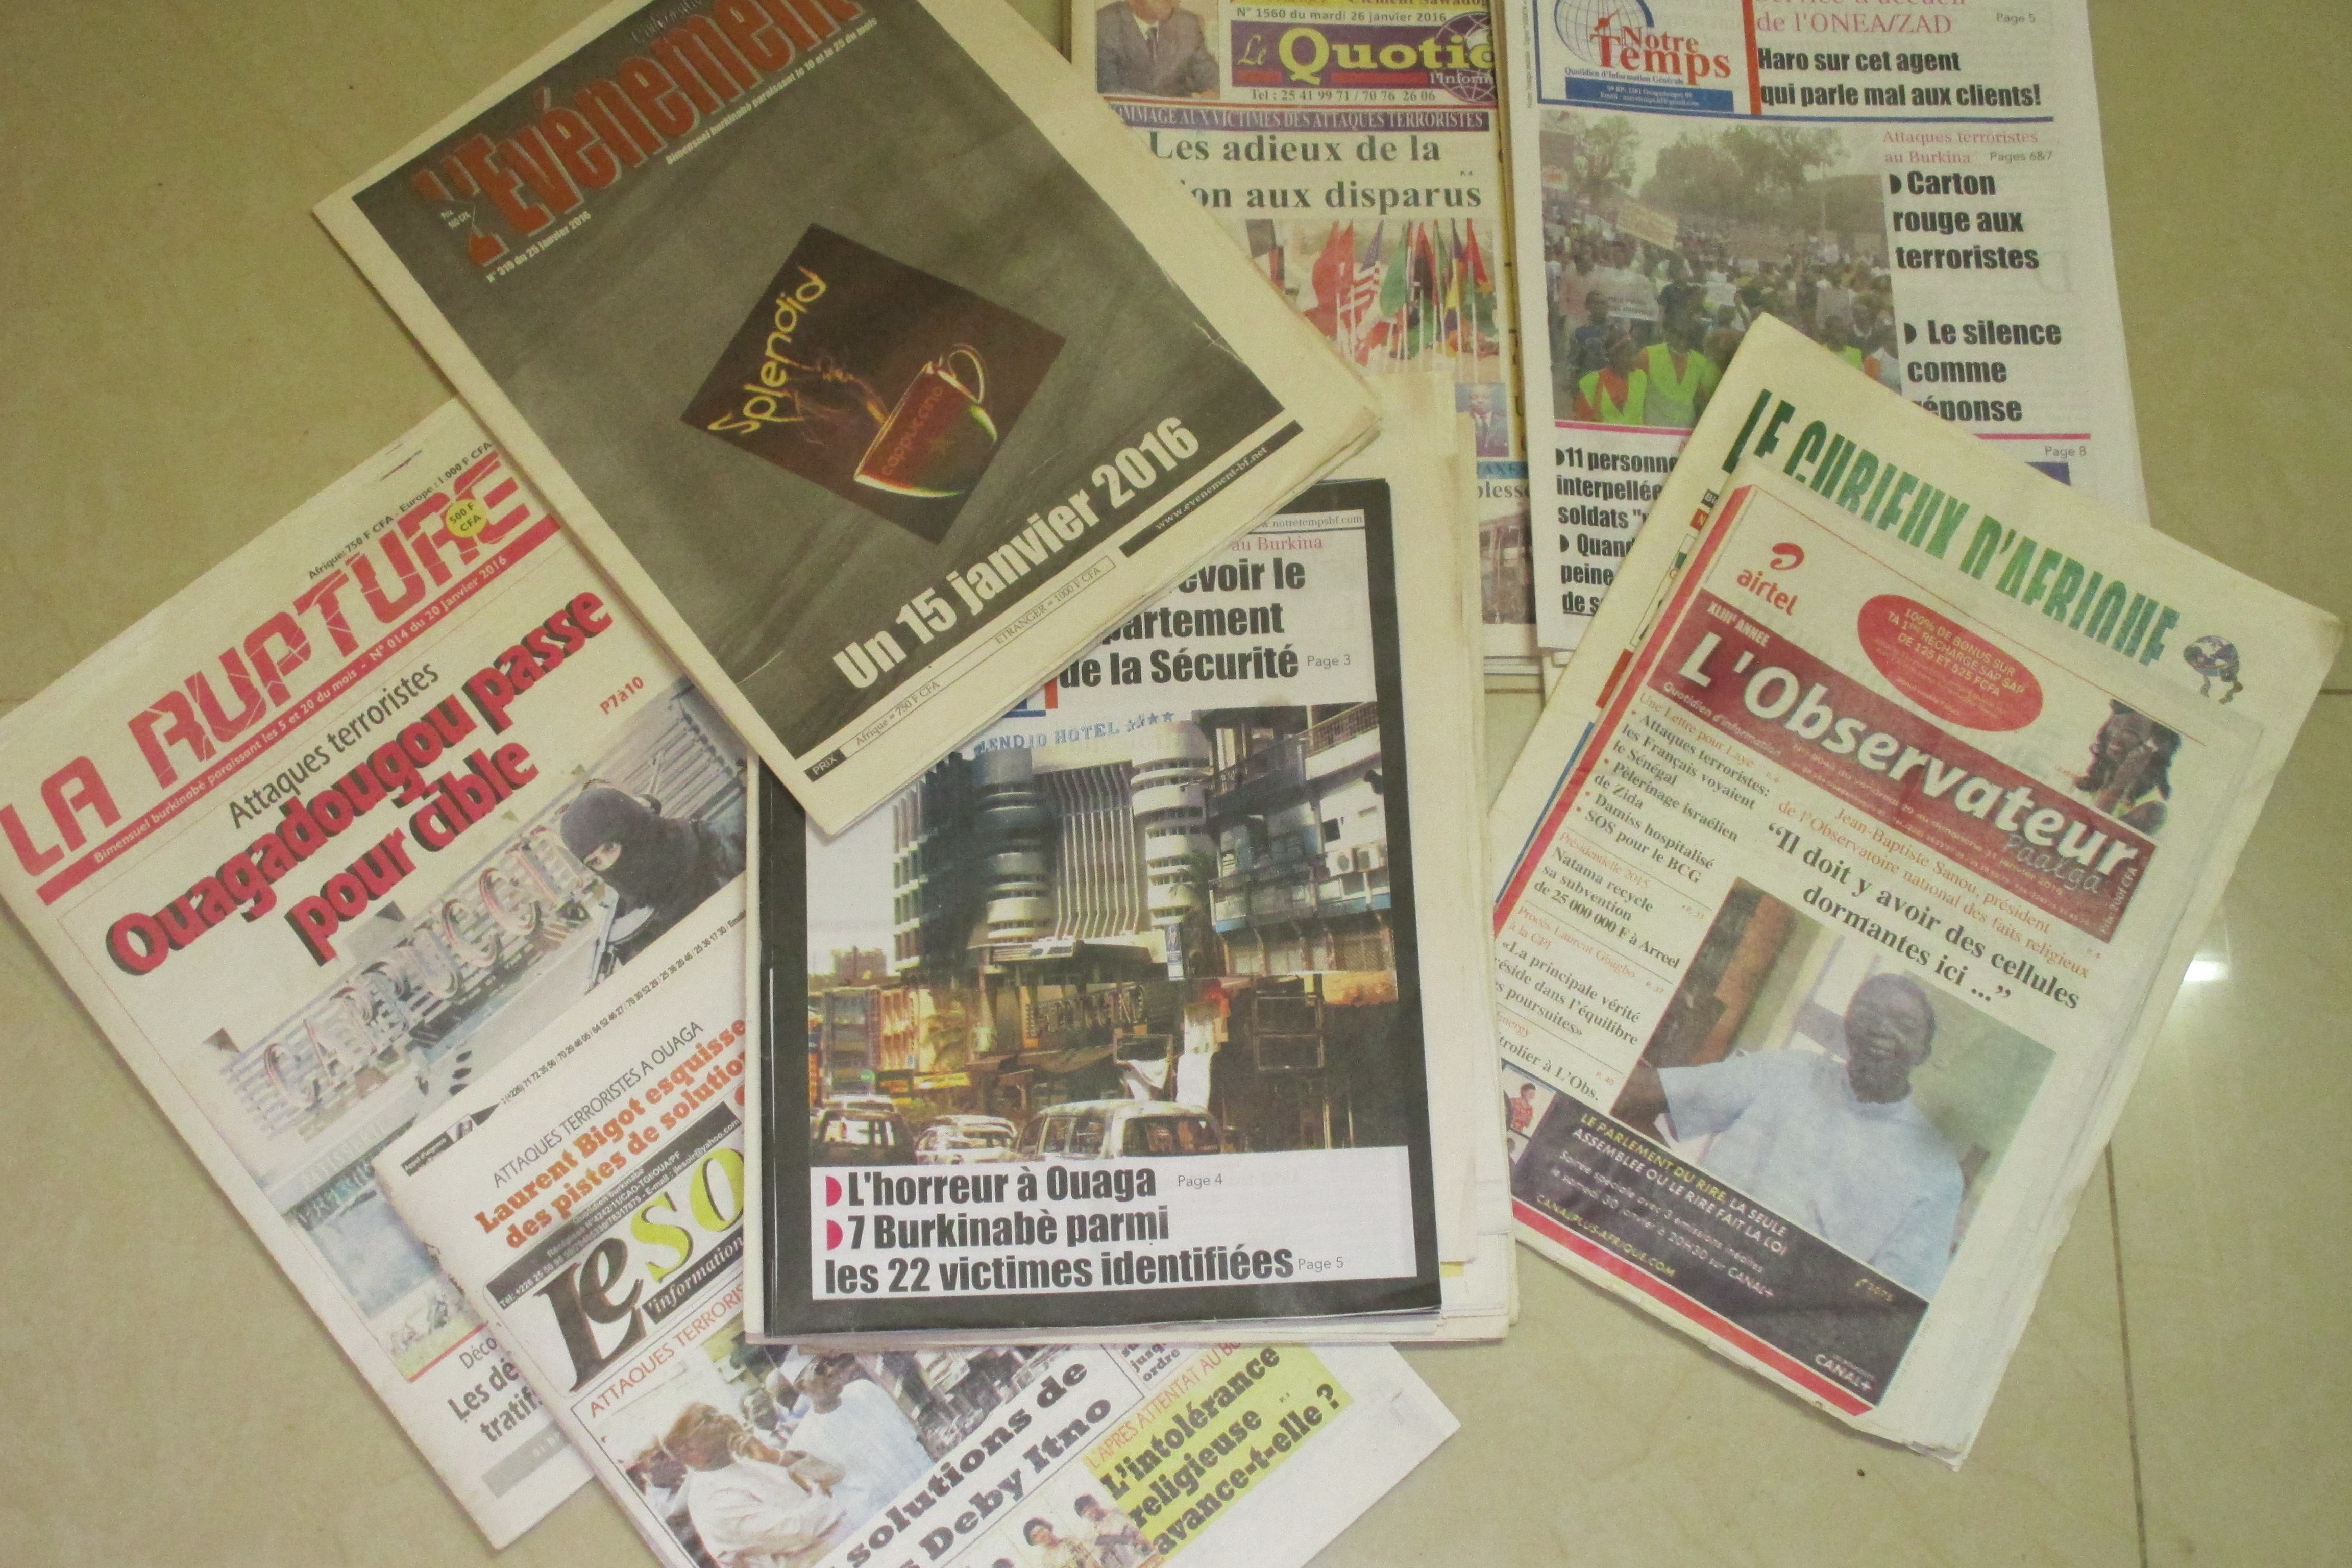 Burkinabè press coverage of the events